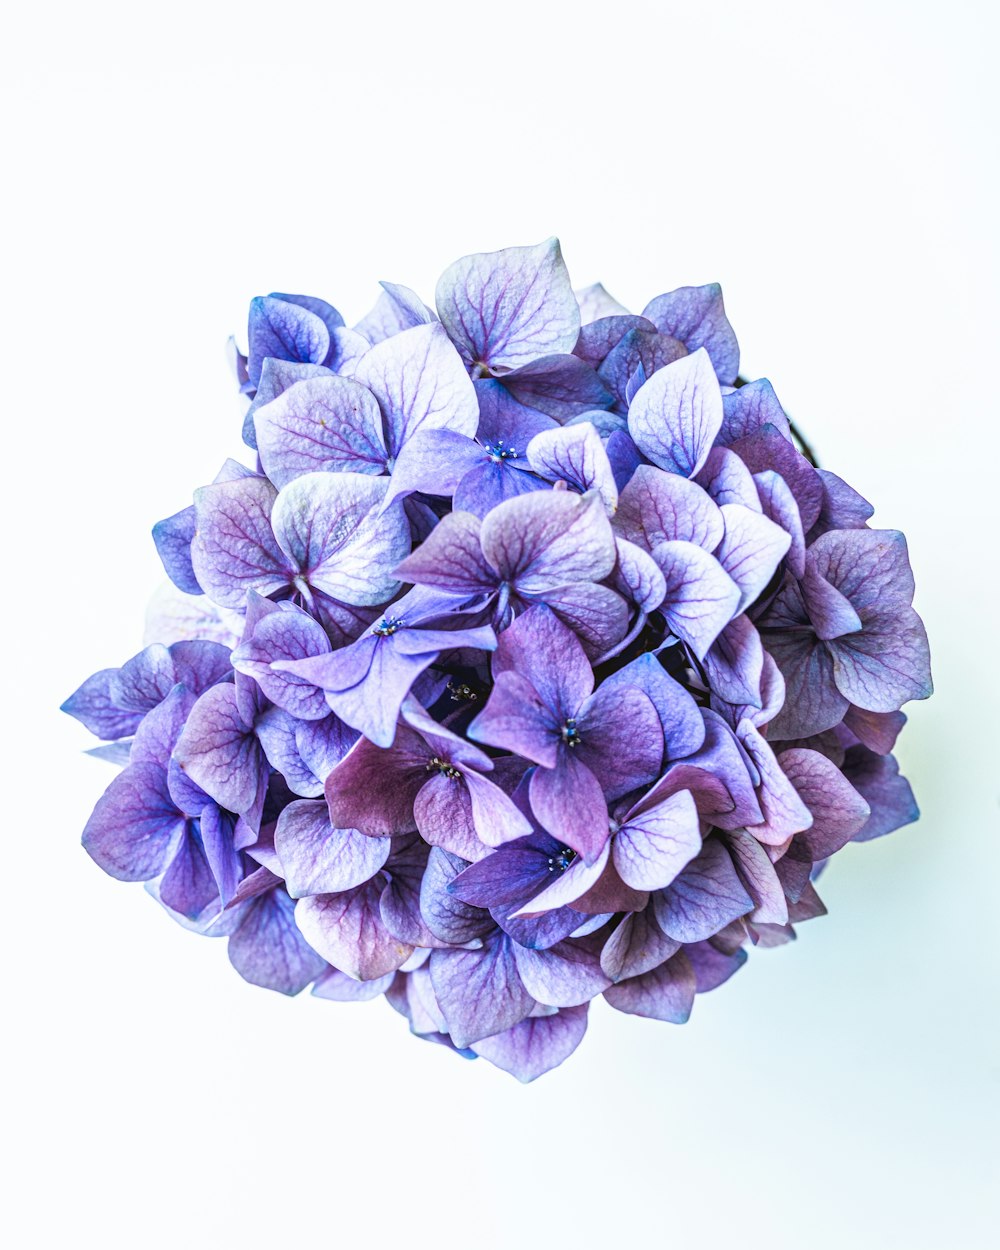 a bouquet of purple flowers on a white background